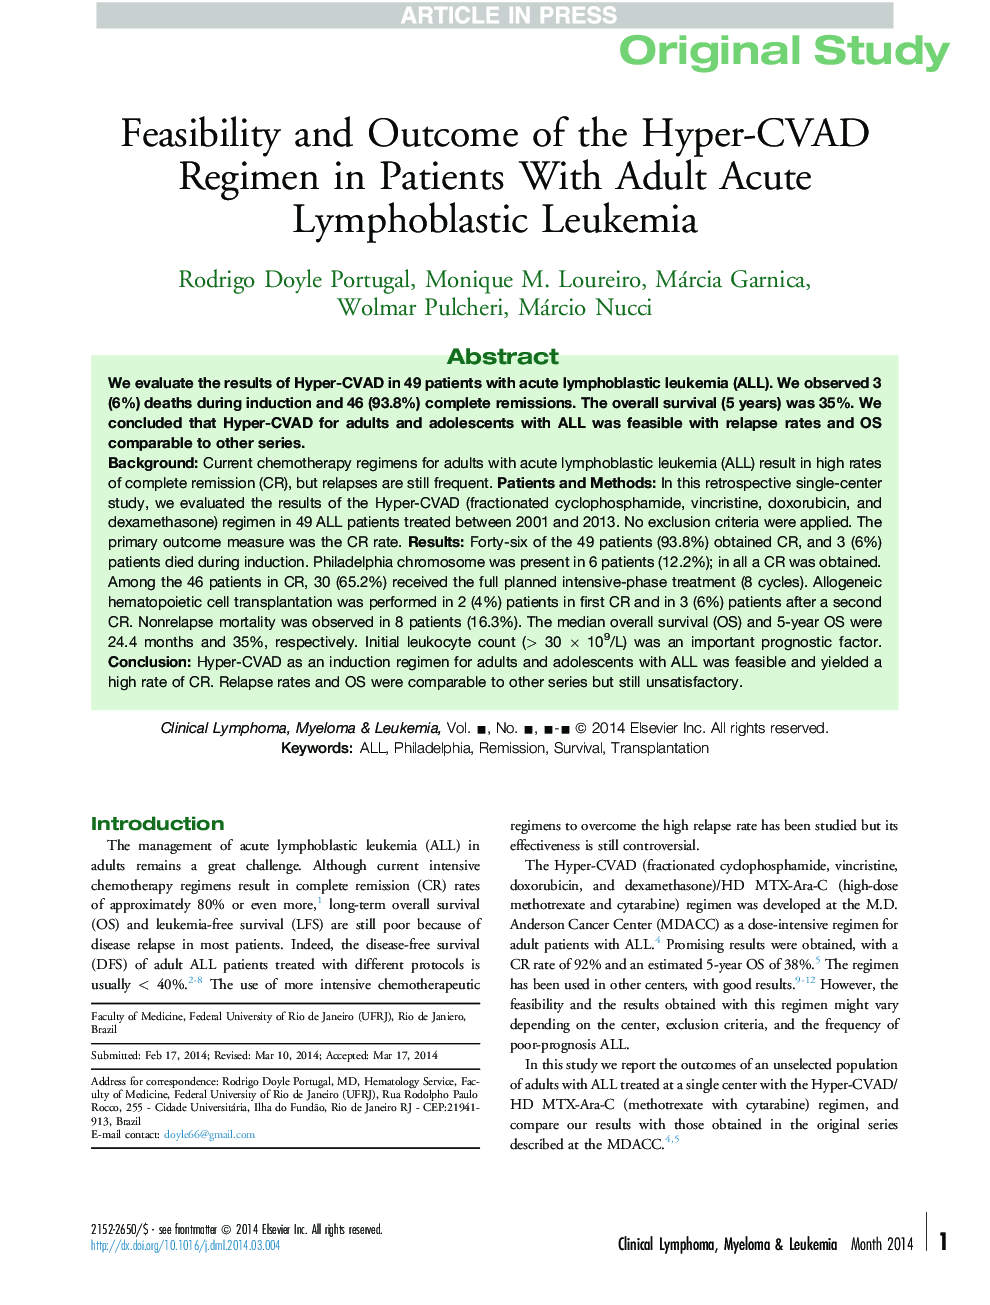 Feasibility and Outcome of the Hyper-CVAD Regimen in Patients With Adult Acute Lymphoblastic Leukemia